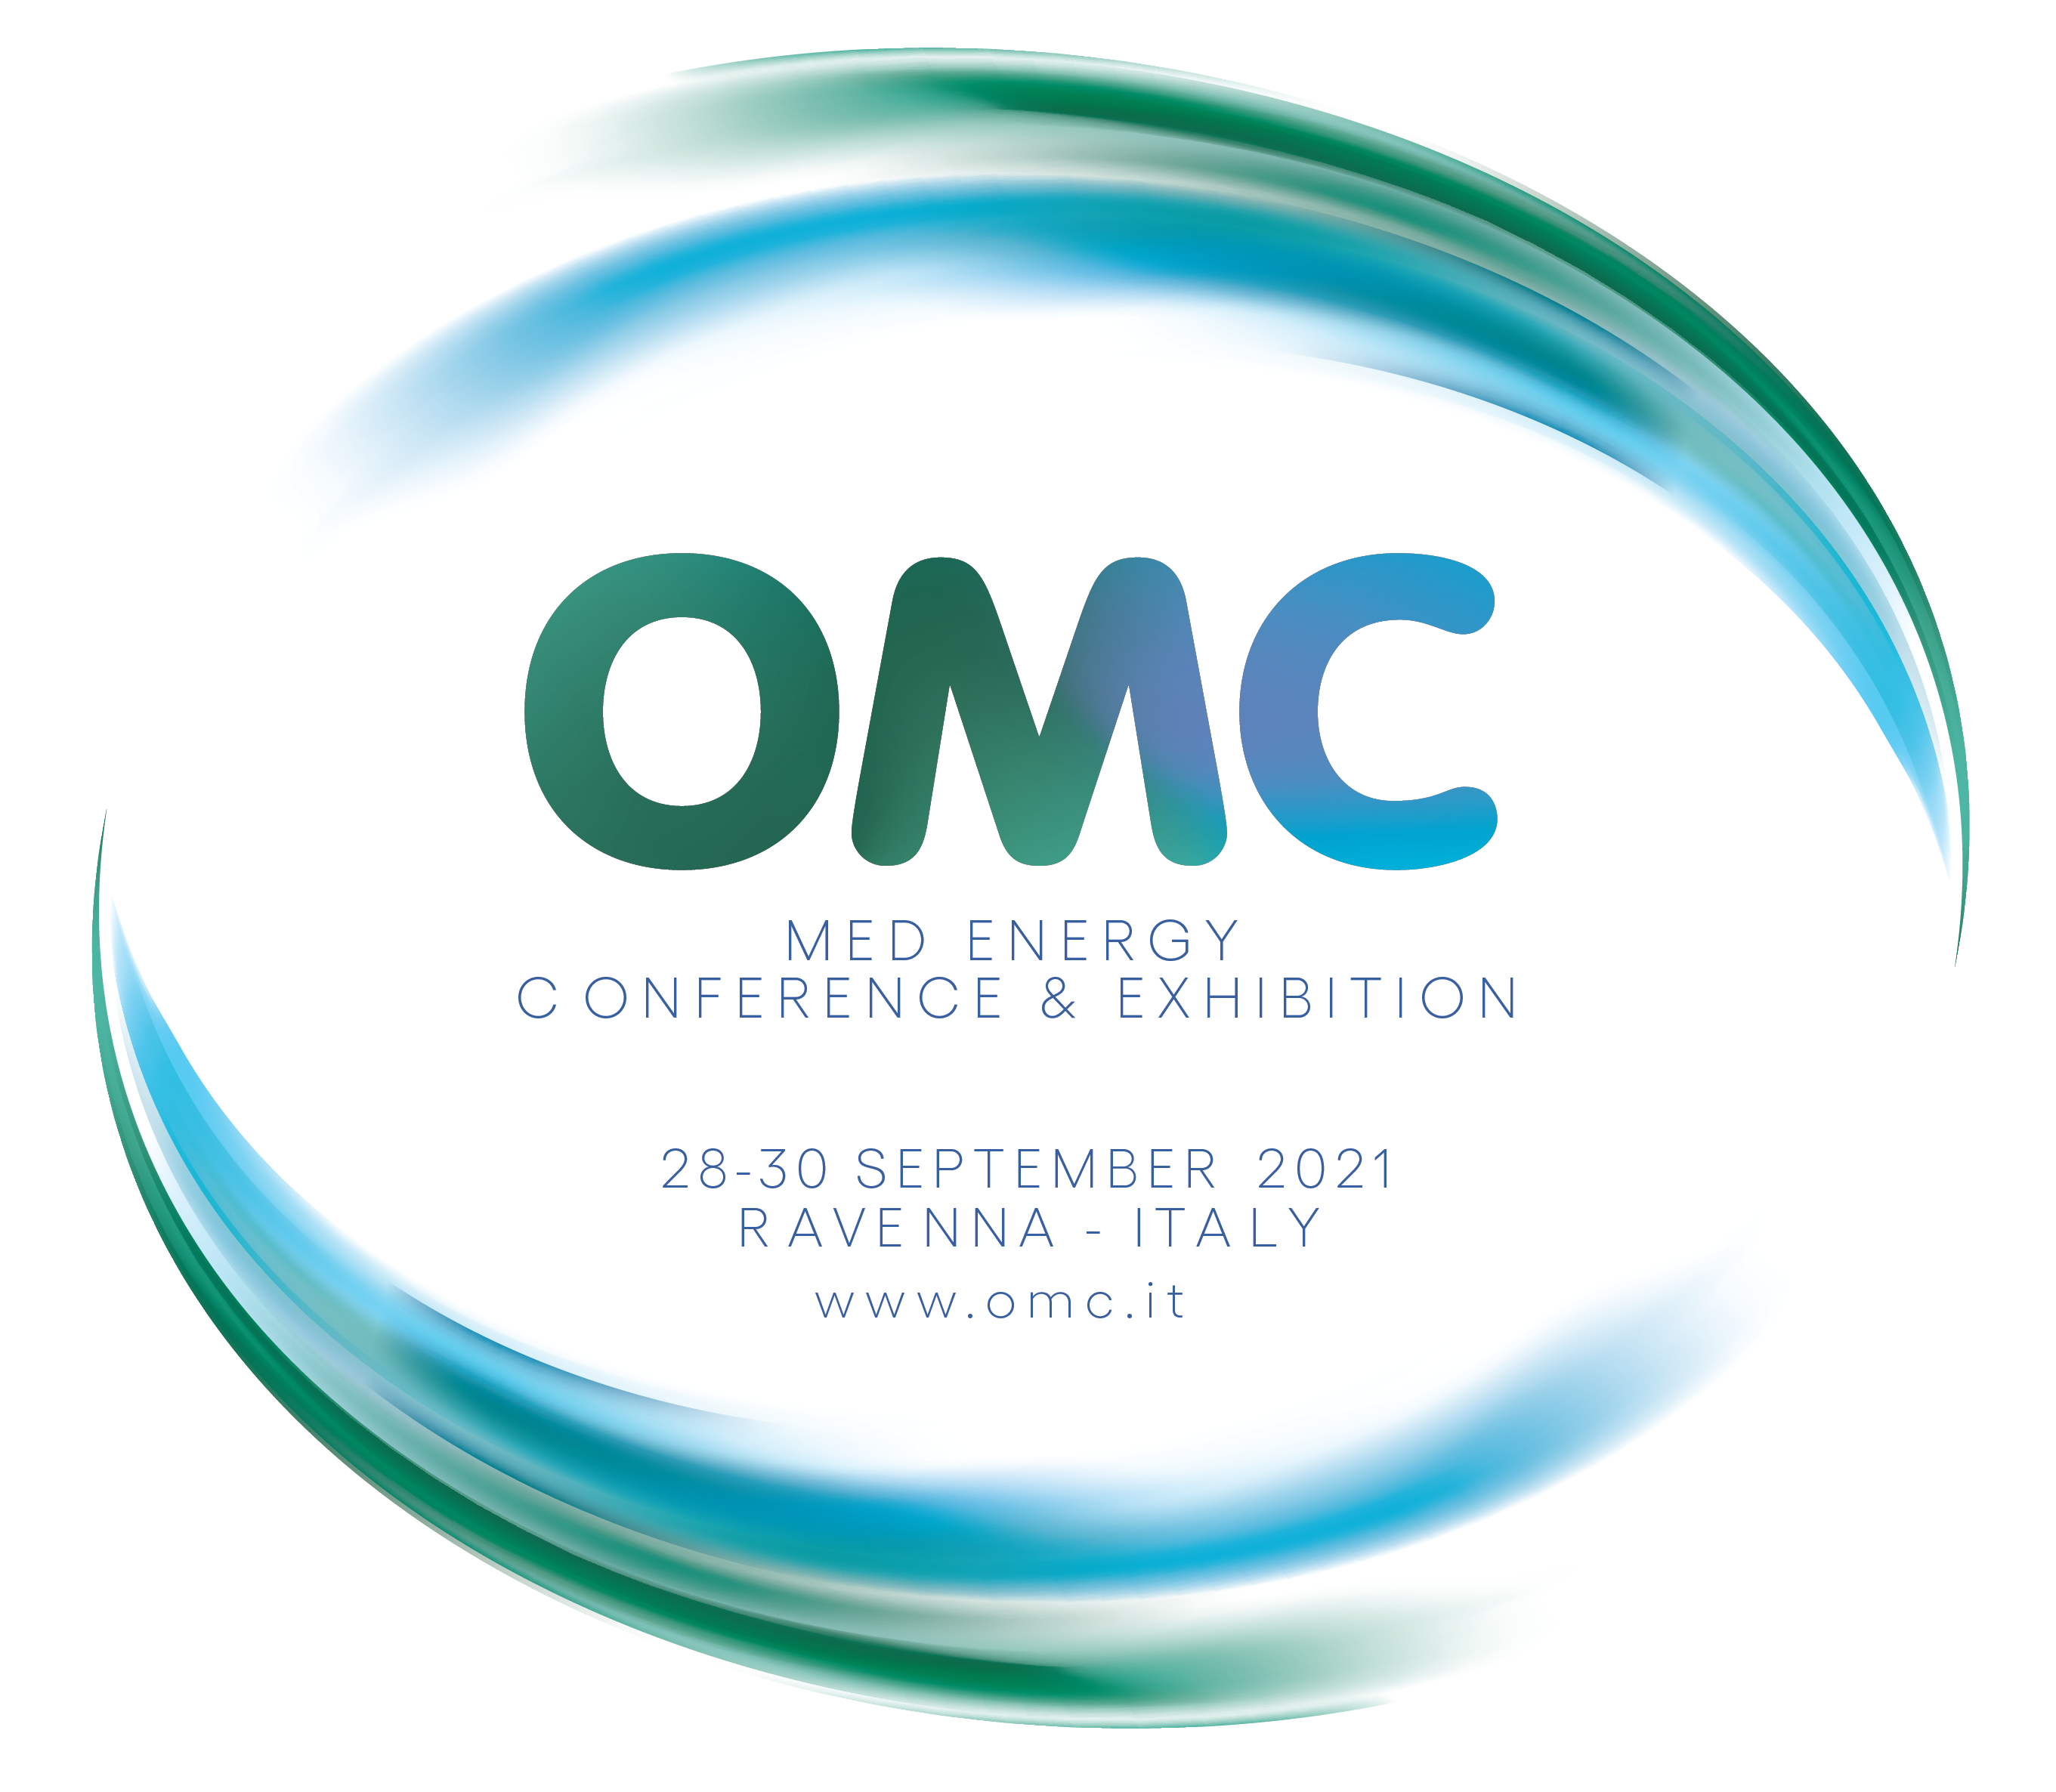 B2b in presenza e virtuali a OMC 2021 - Med Energy Conference and Exhibition (28/9-6/10/2021)